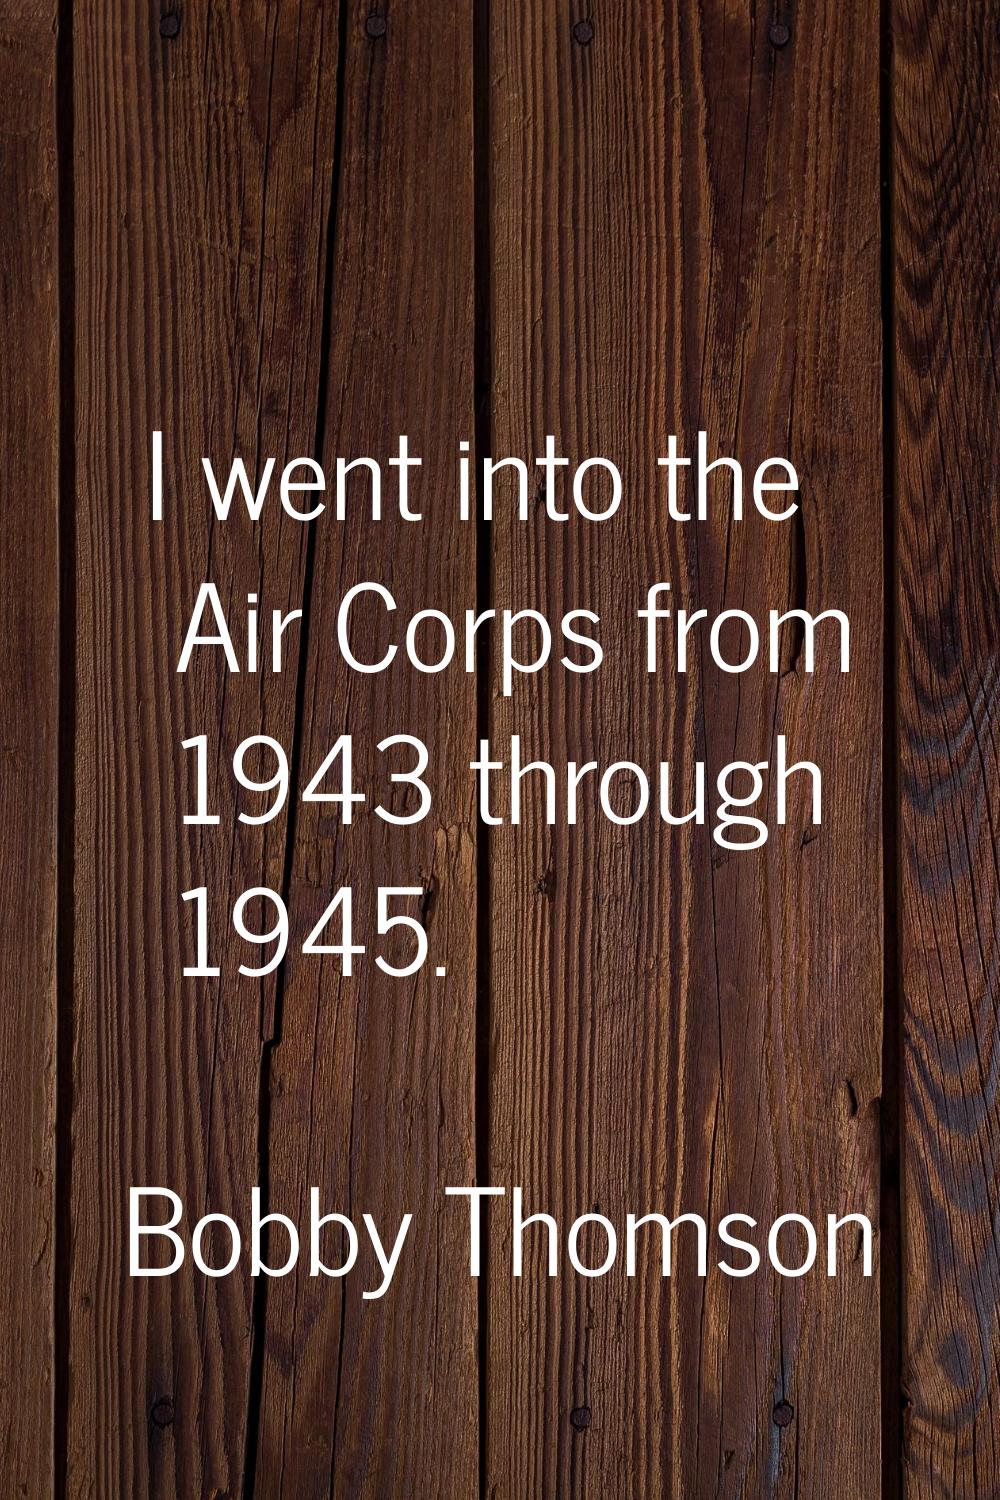 I went into the Air Corps from 1943 through 1945.